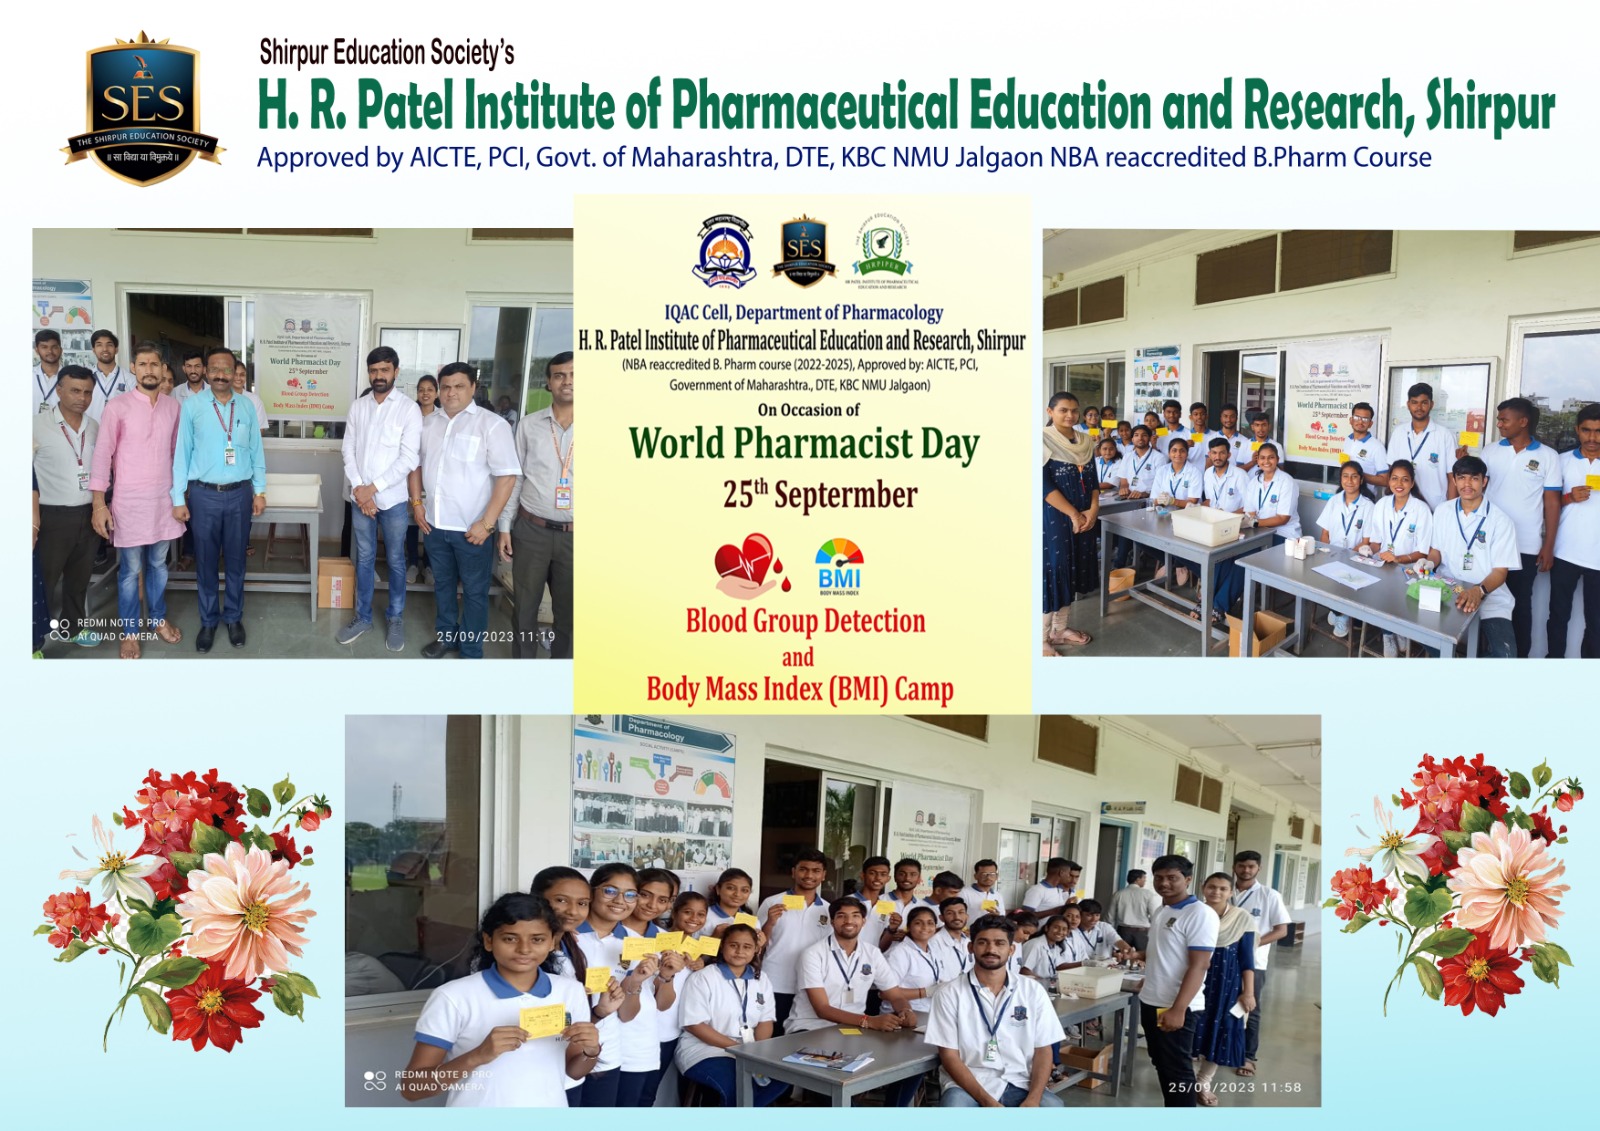 World Pharmacist Day-Blood Group Detection Camp